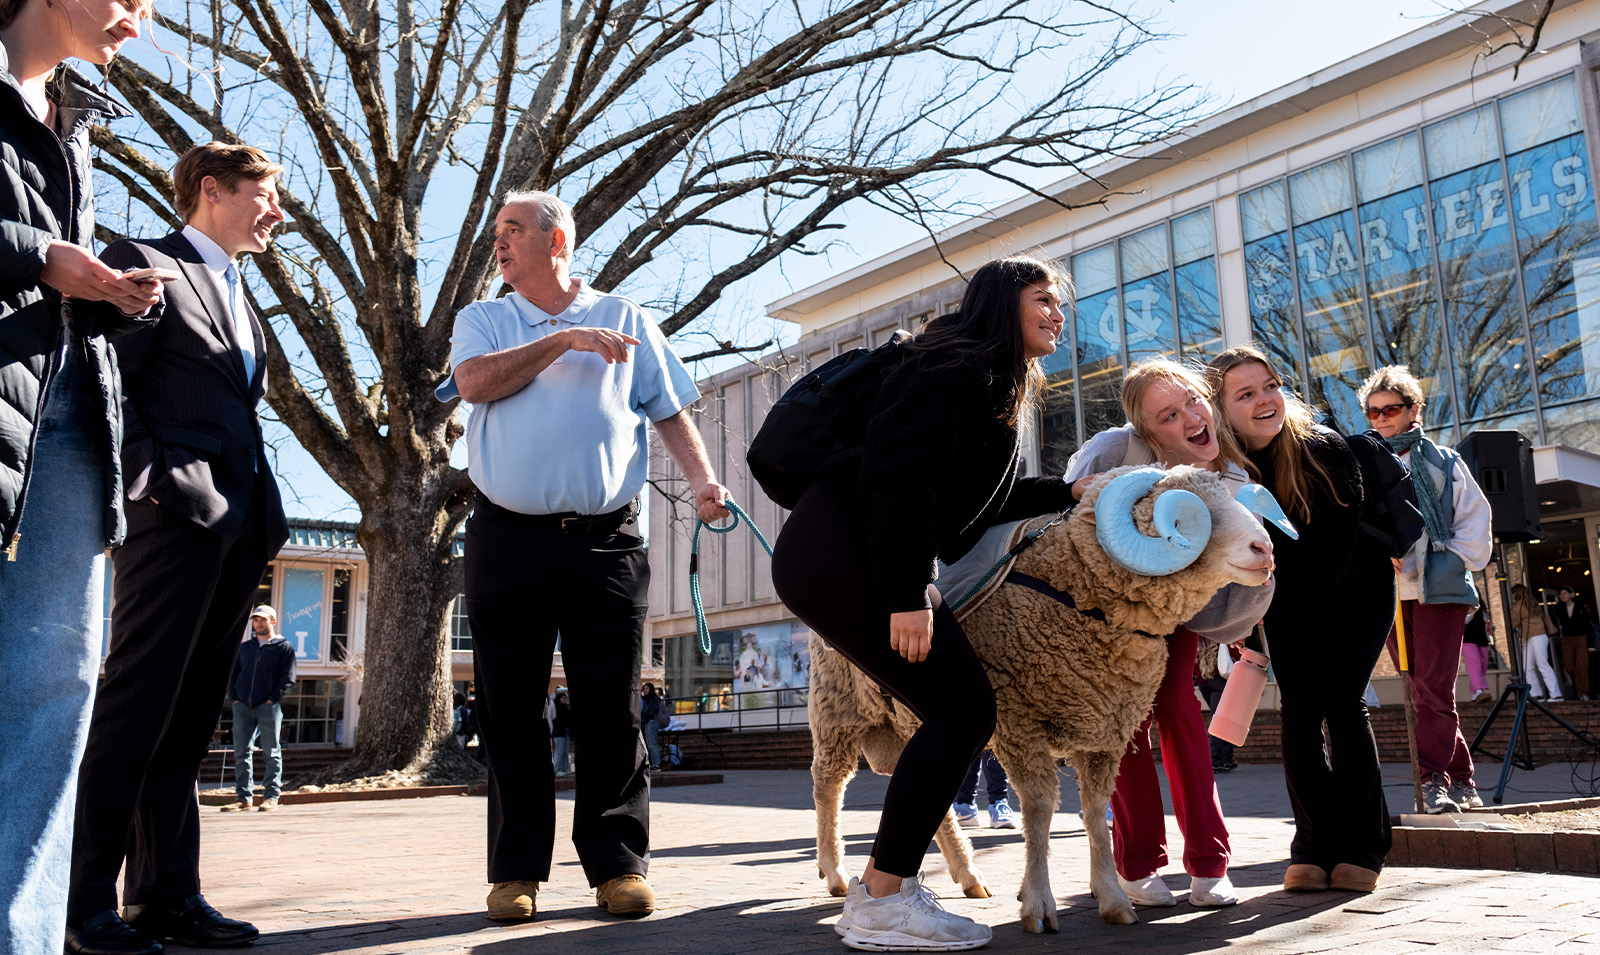 Students posing with a live ram mascot, Rameses, at the Pit on the campus of UNC-Chapel Hill.